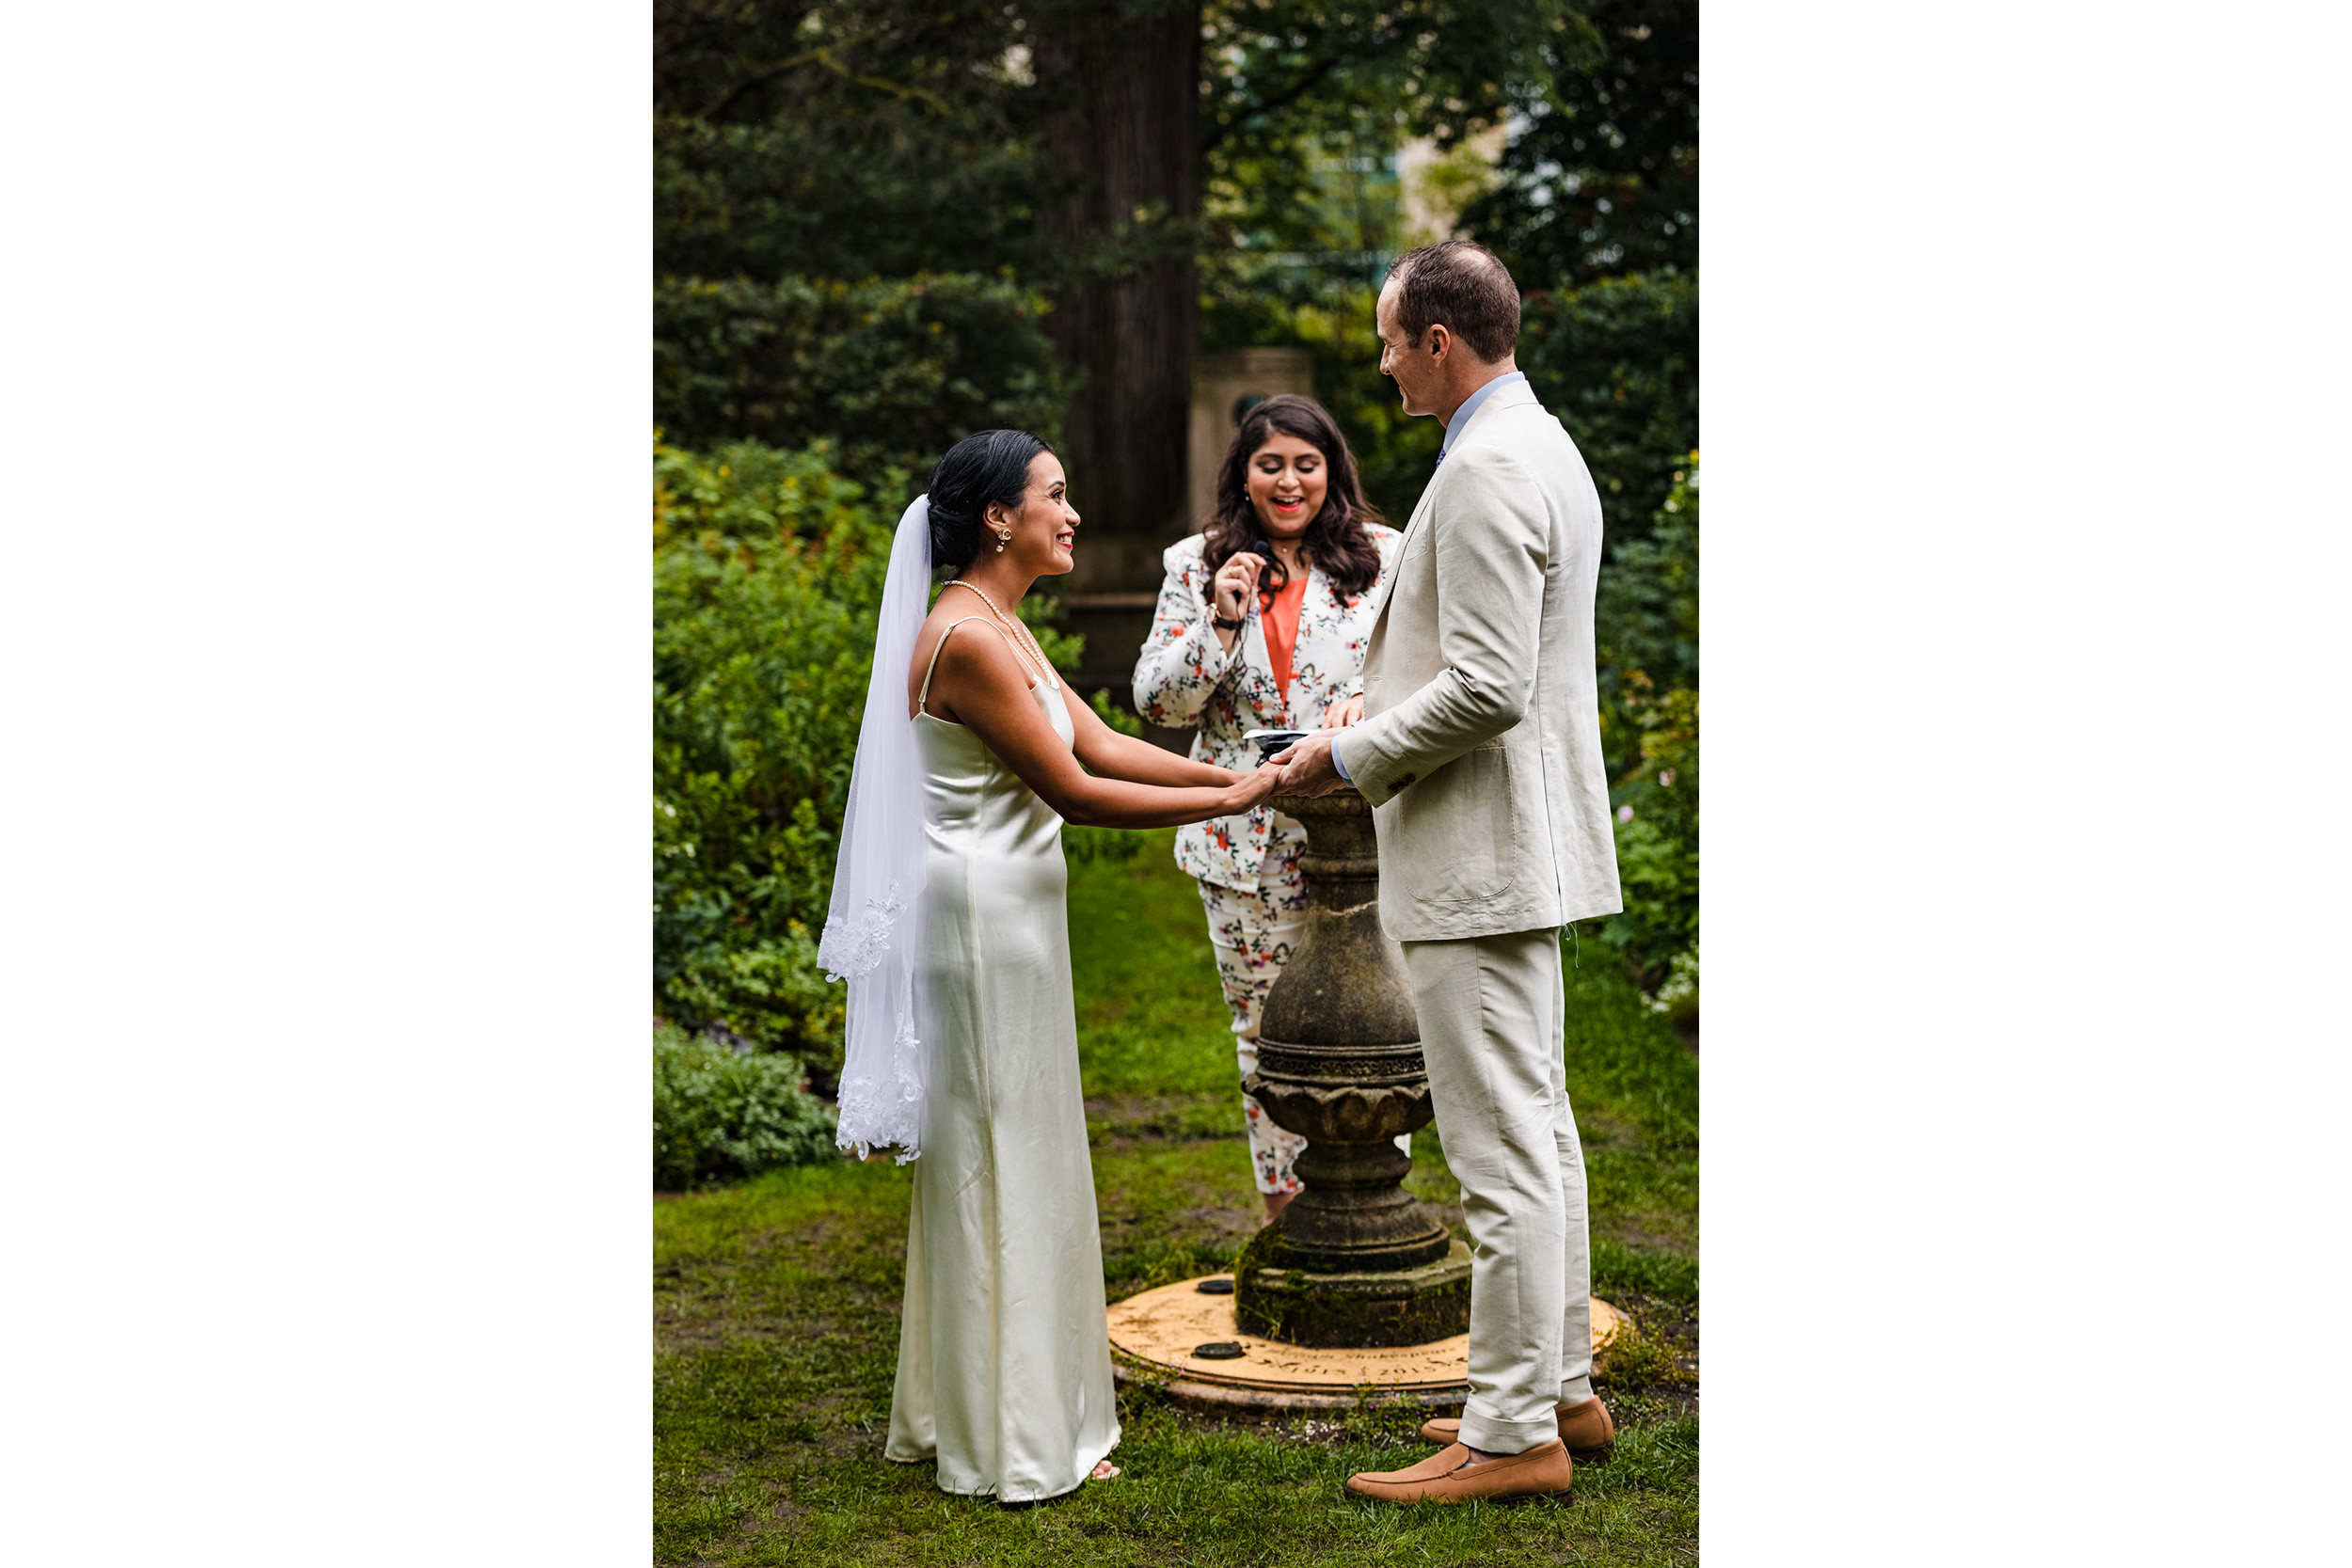 A couple laughs during their vows at a Shakespeare Garden micro wedding in Evanston.